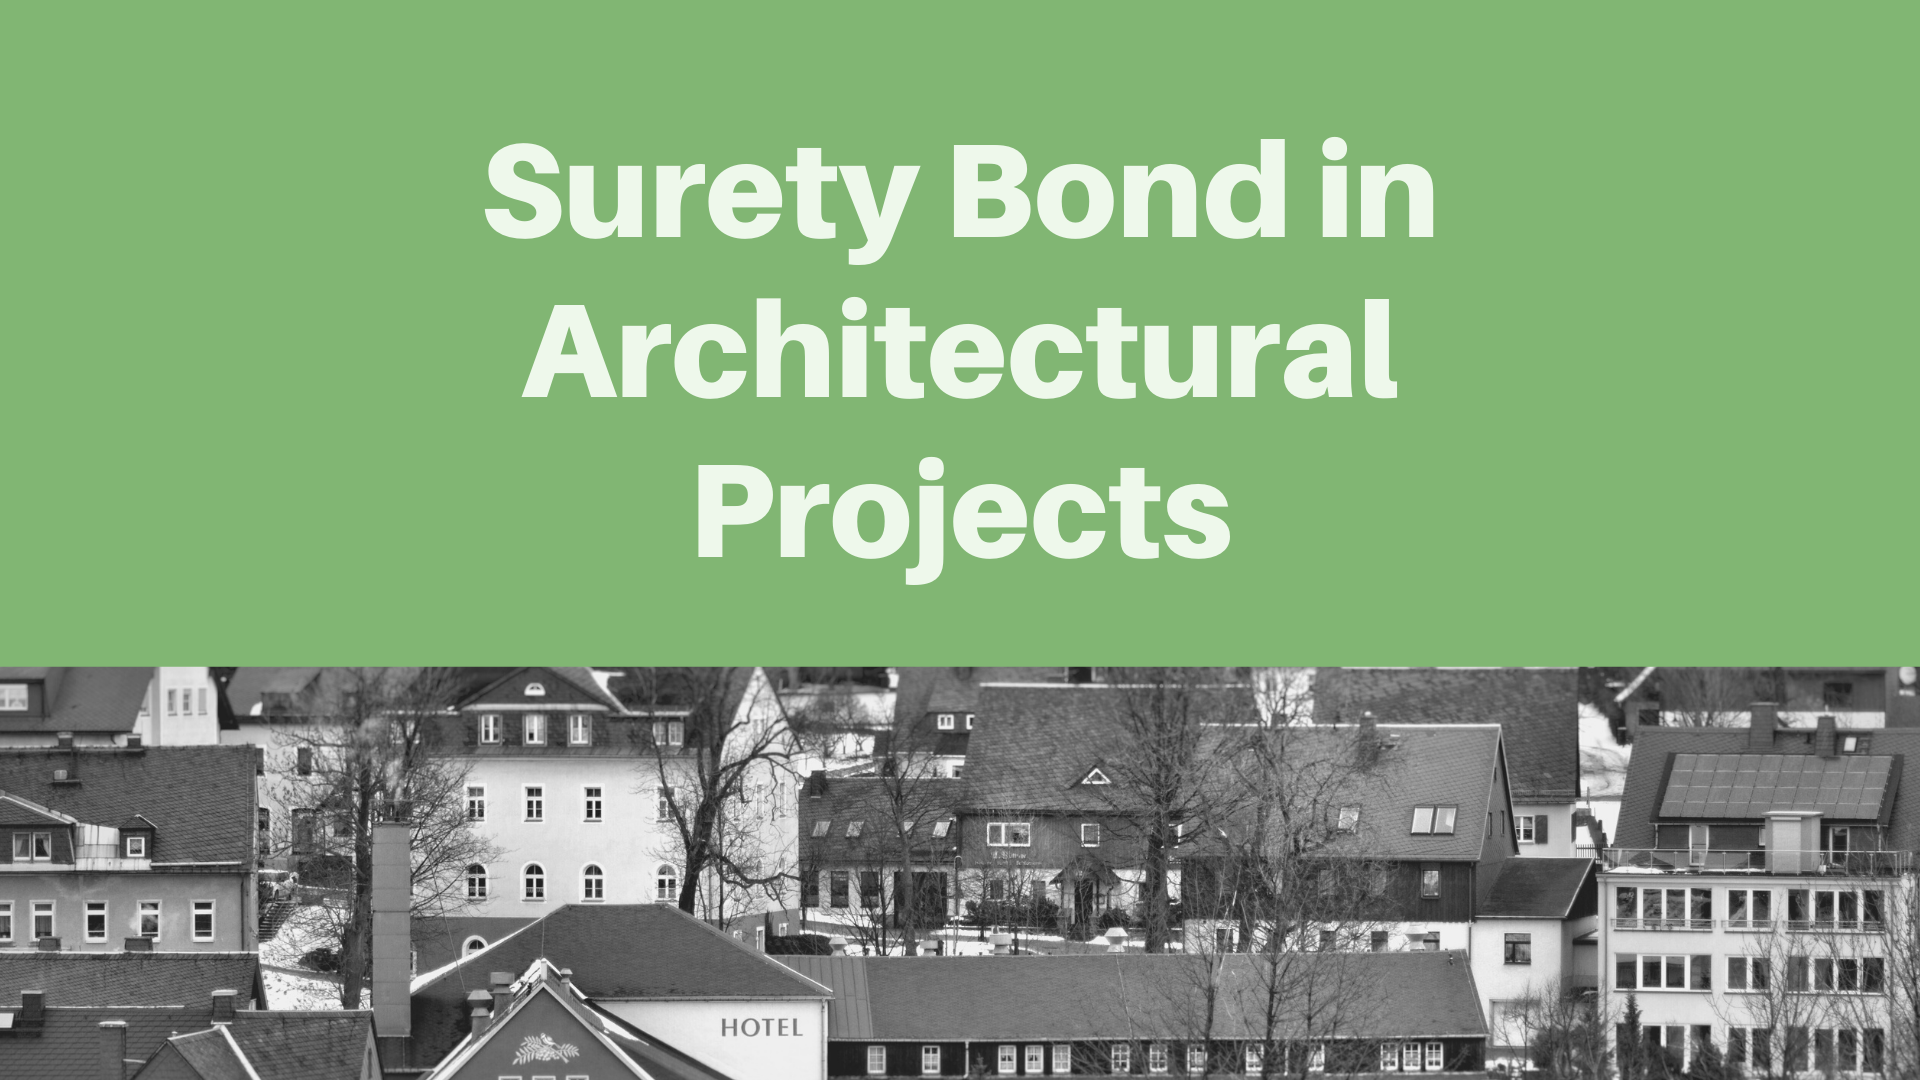 surety bond - Why does an architect require a surety bond - old buildings